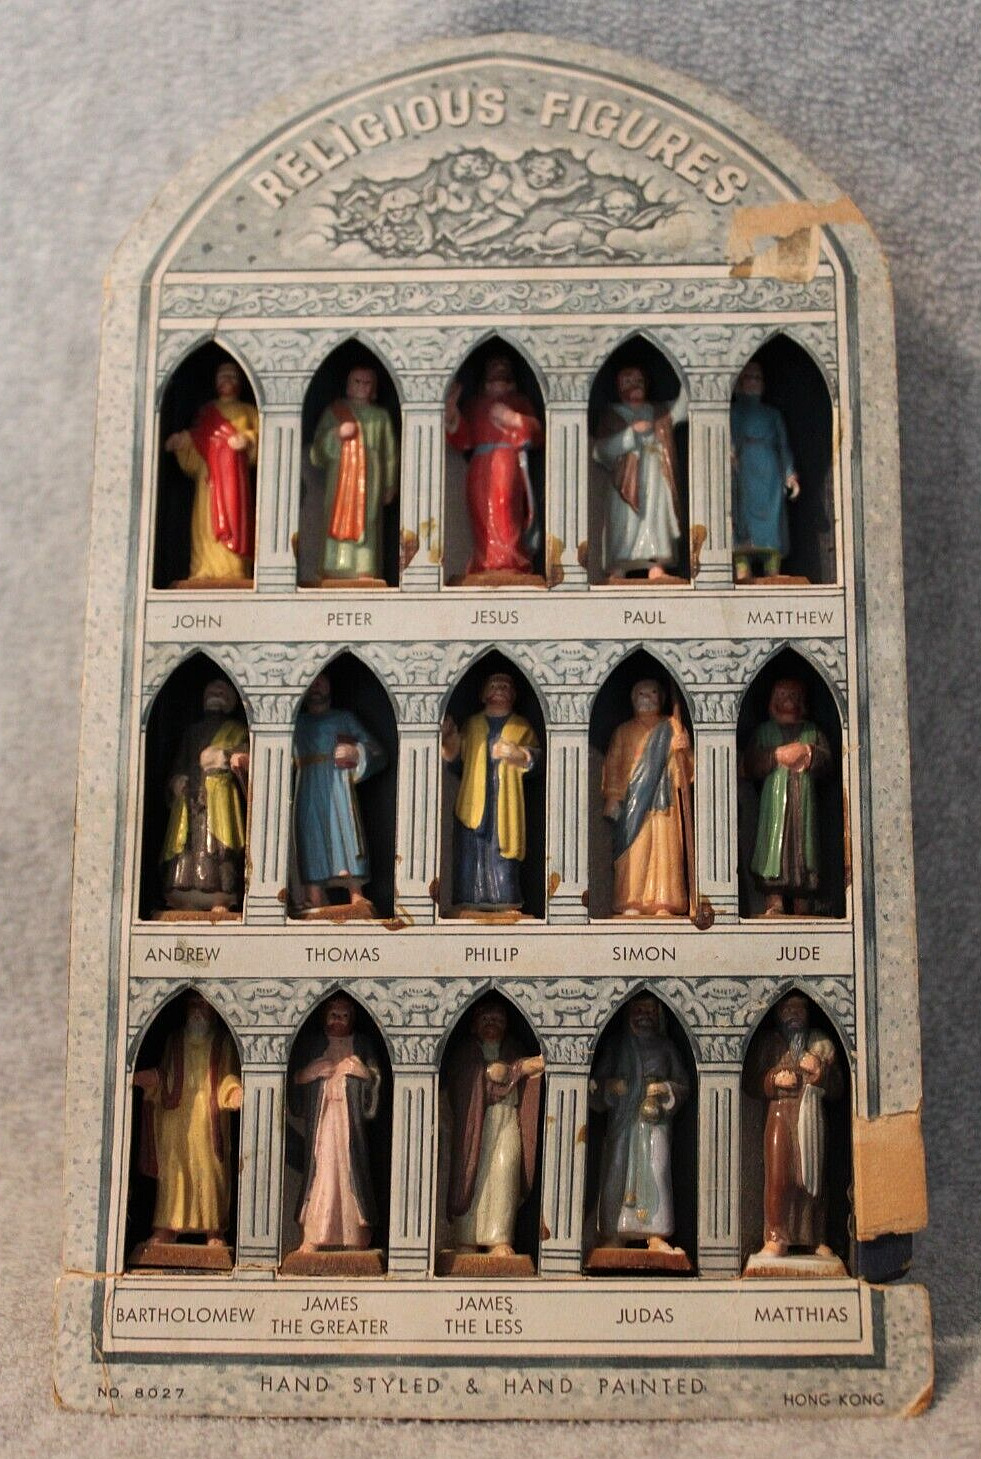 Vintage Set of 15 Religious Figures Hand Styled Hand Painted Hong Kong 8027 RARE